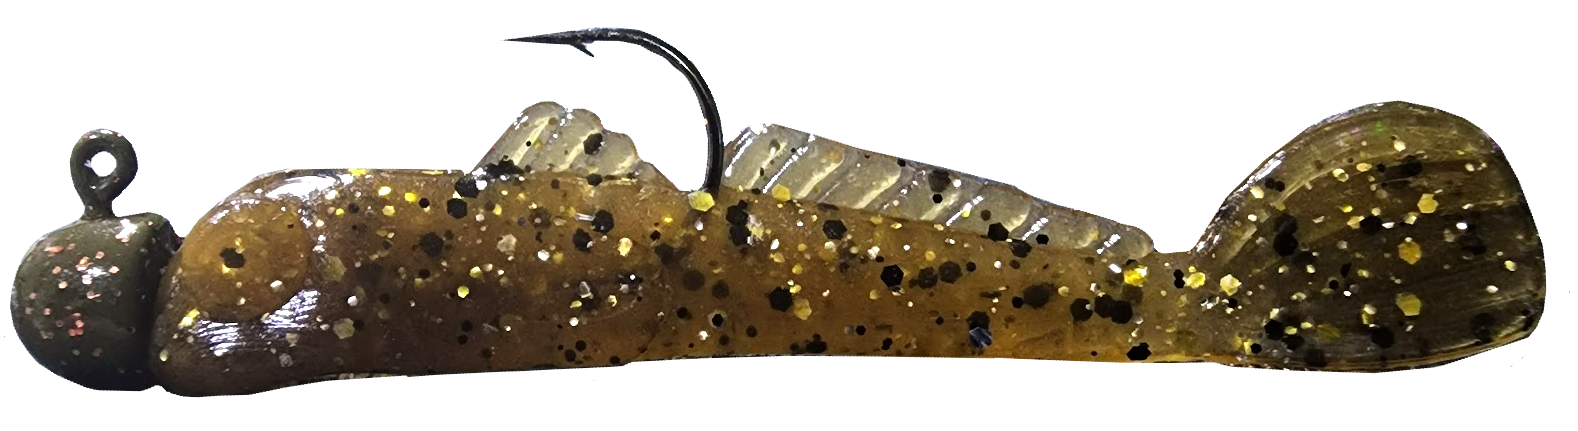 1/8 oz Round Nose Jig (Grumpy Pumpkin) + Mini Goby (Natural Goby/Gold)